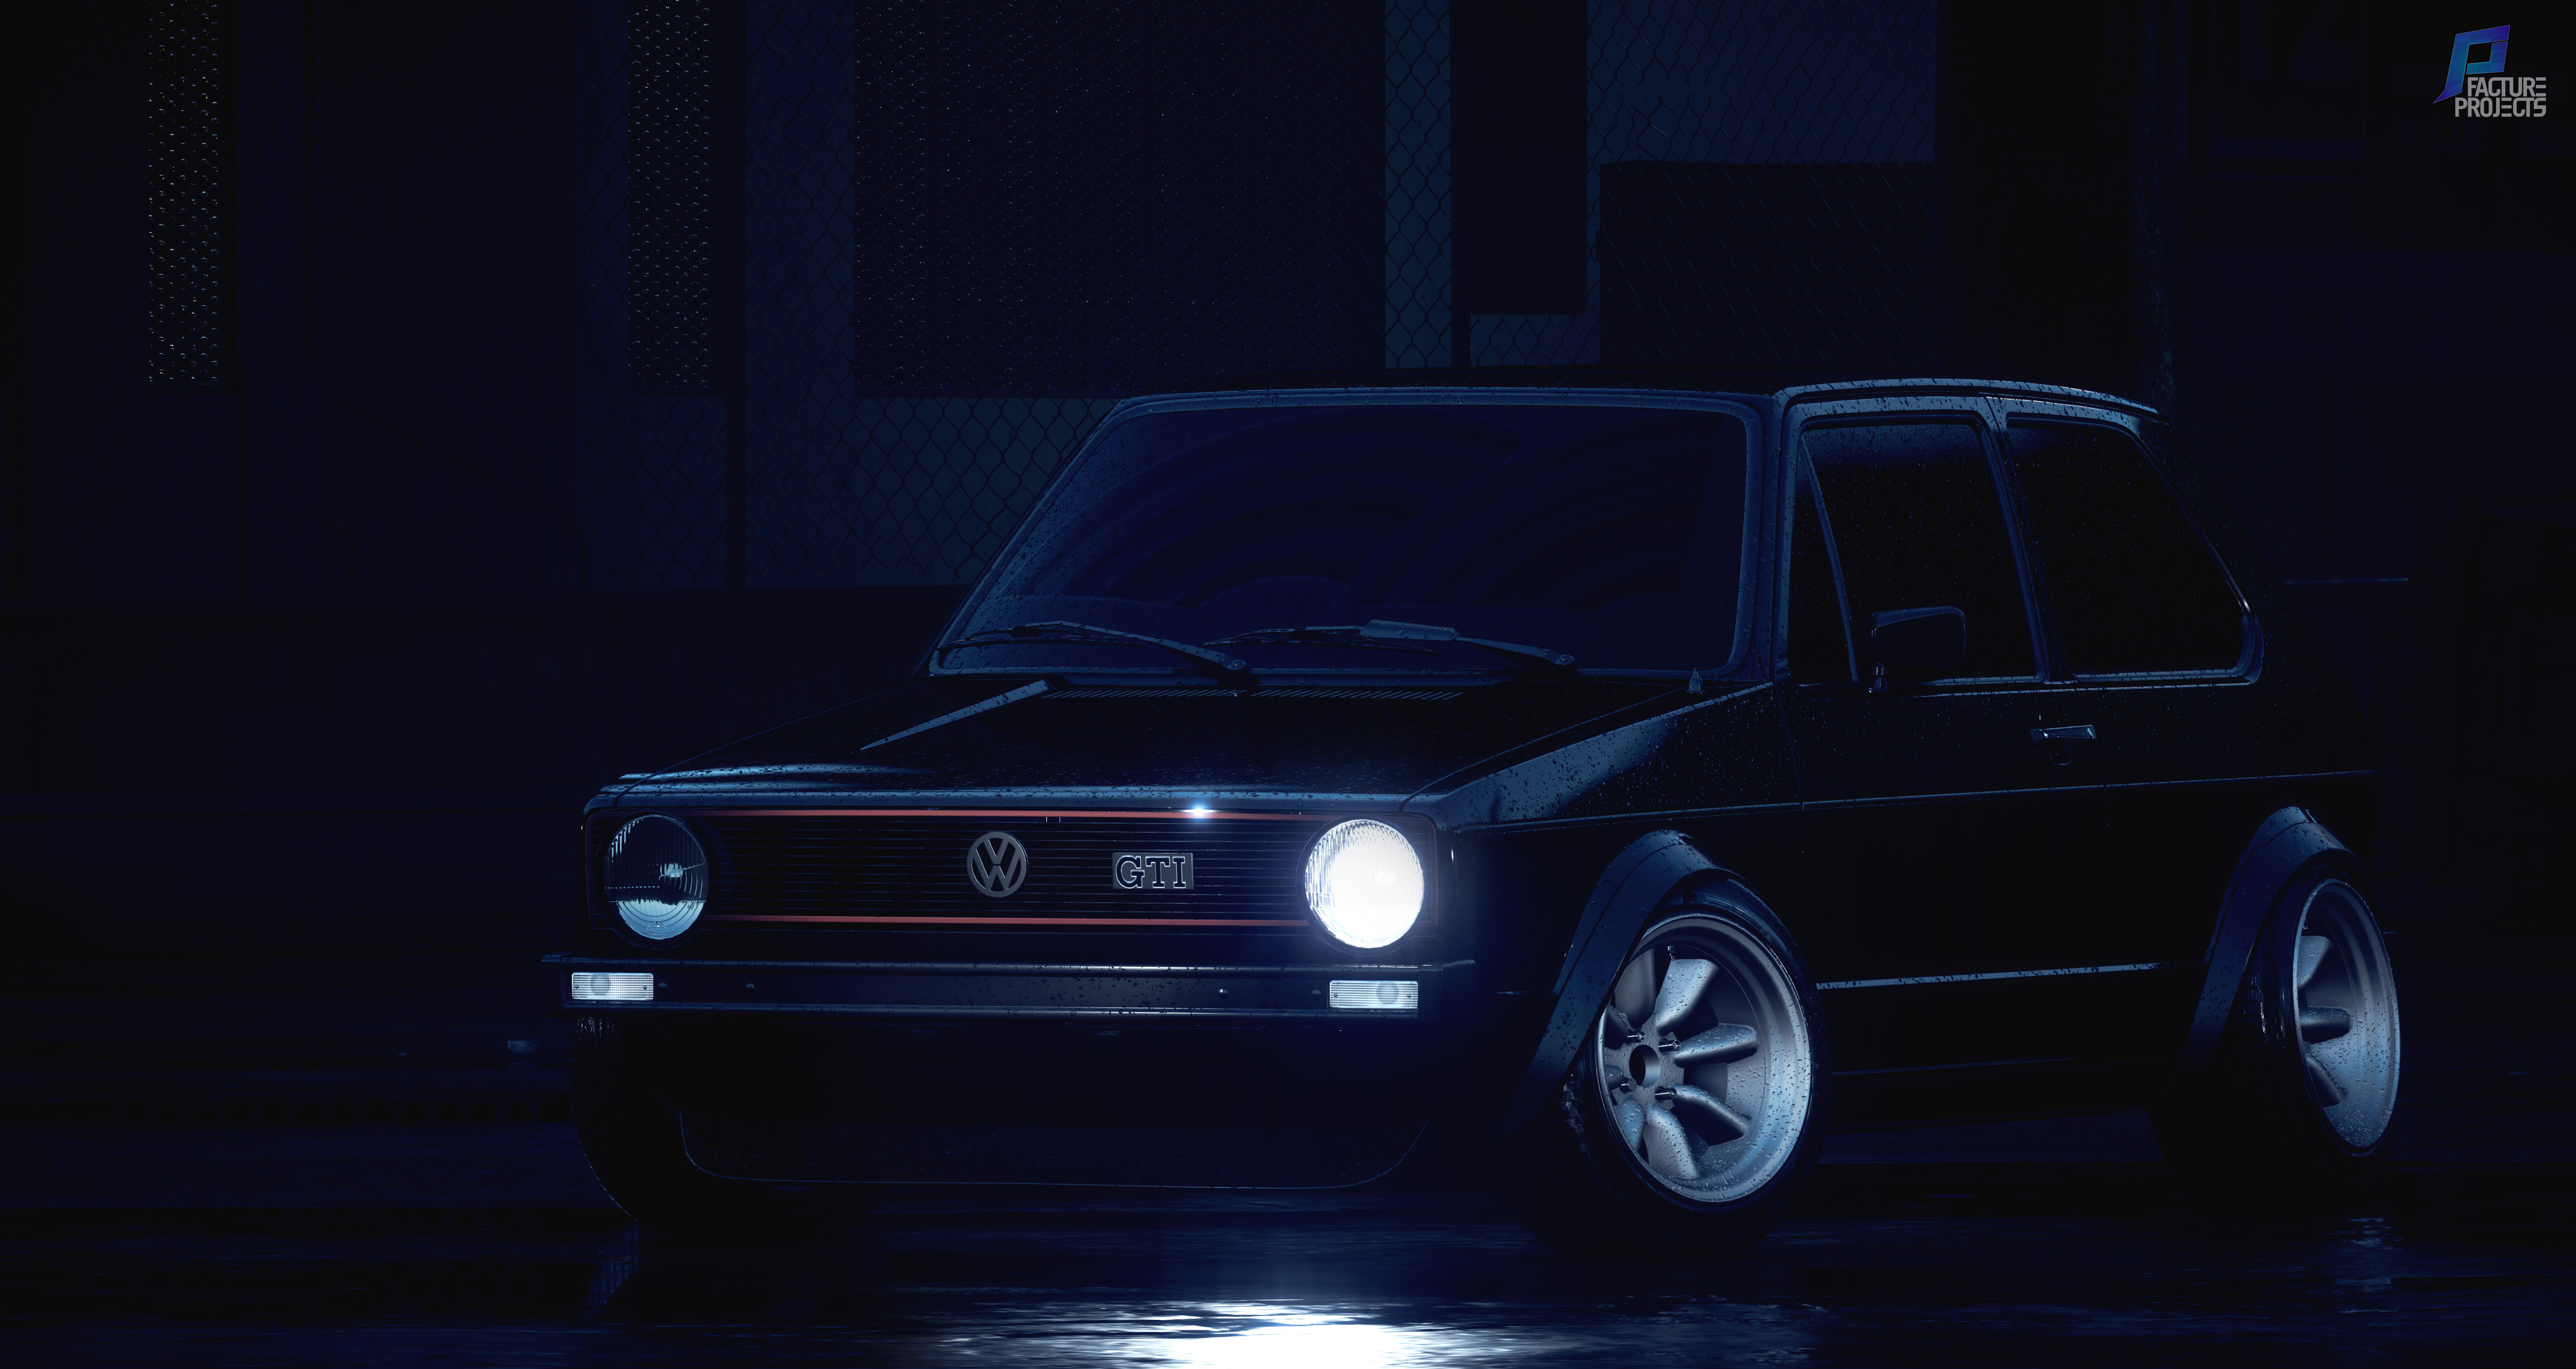 Volkswagen Golf Gti Nfs 8k, HD Cars, 4k Wallpaper, Image, Background, Photo and Picture